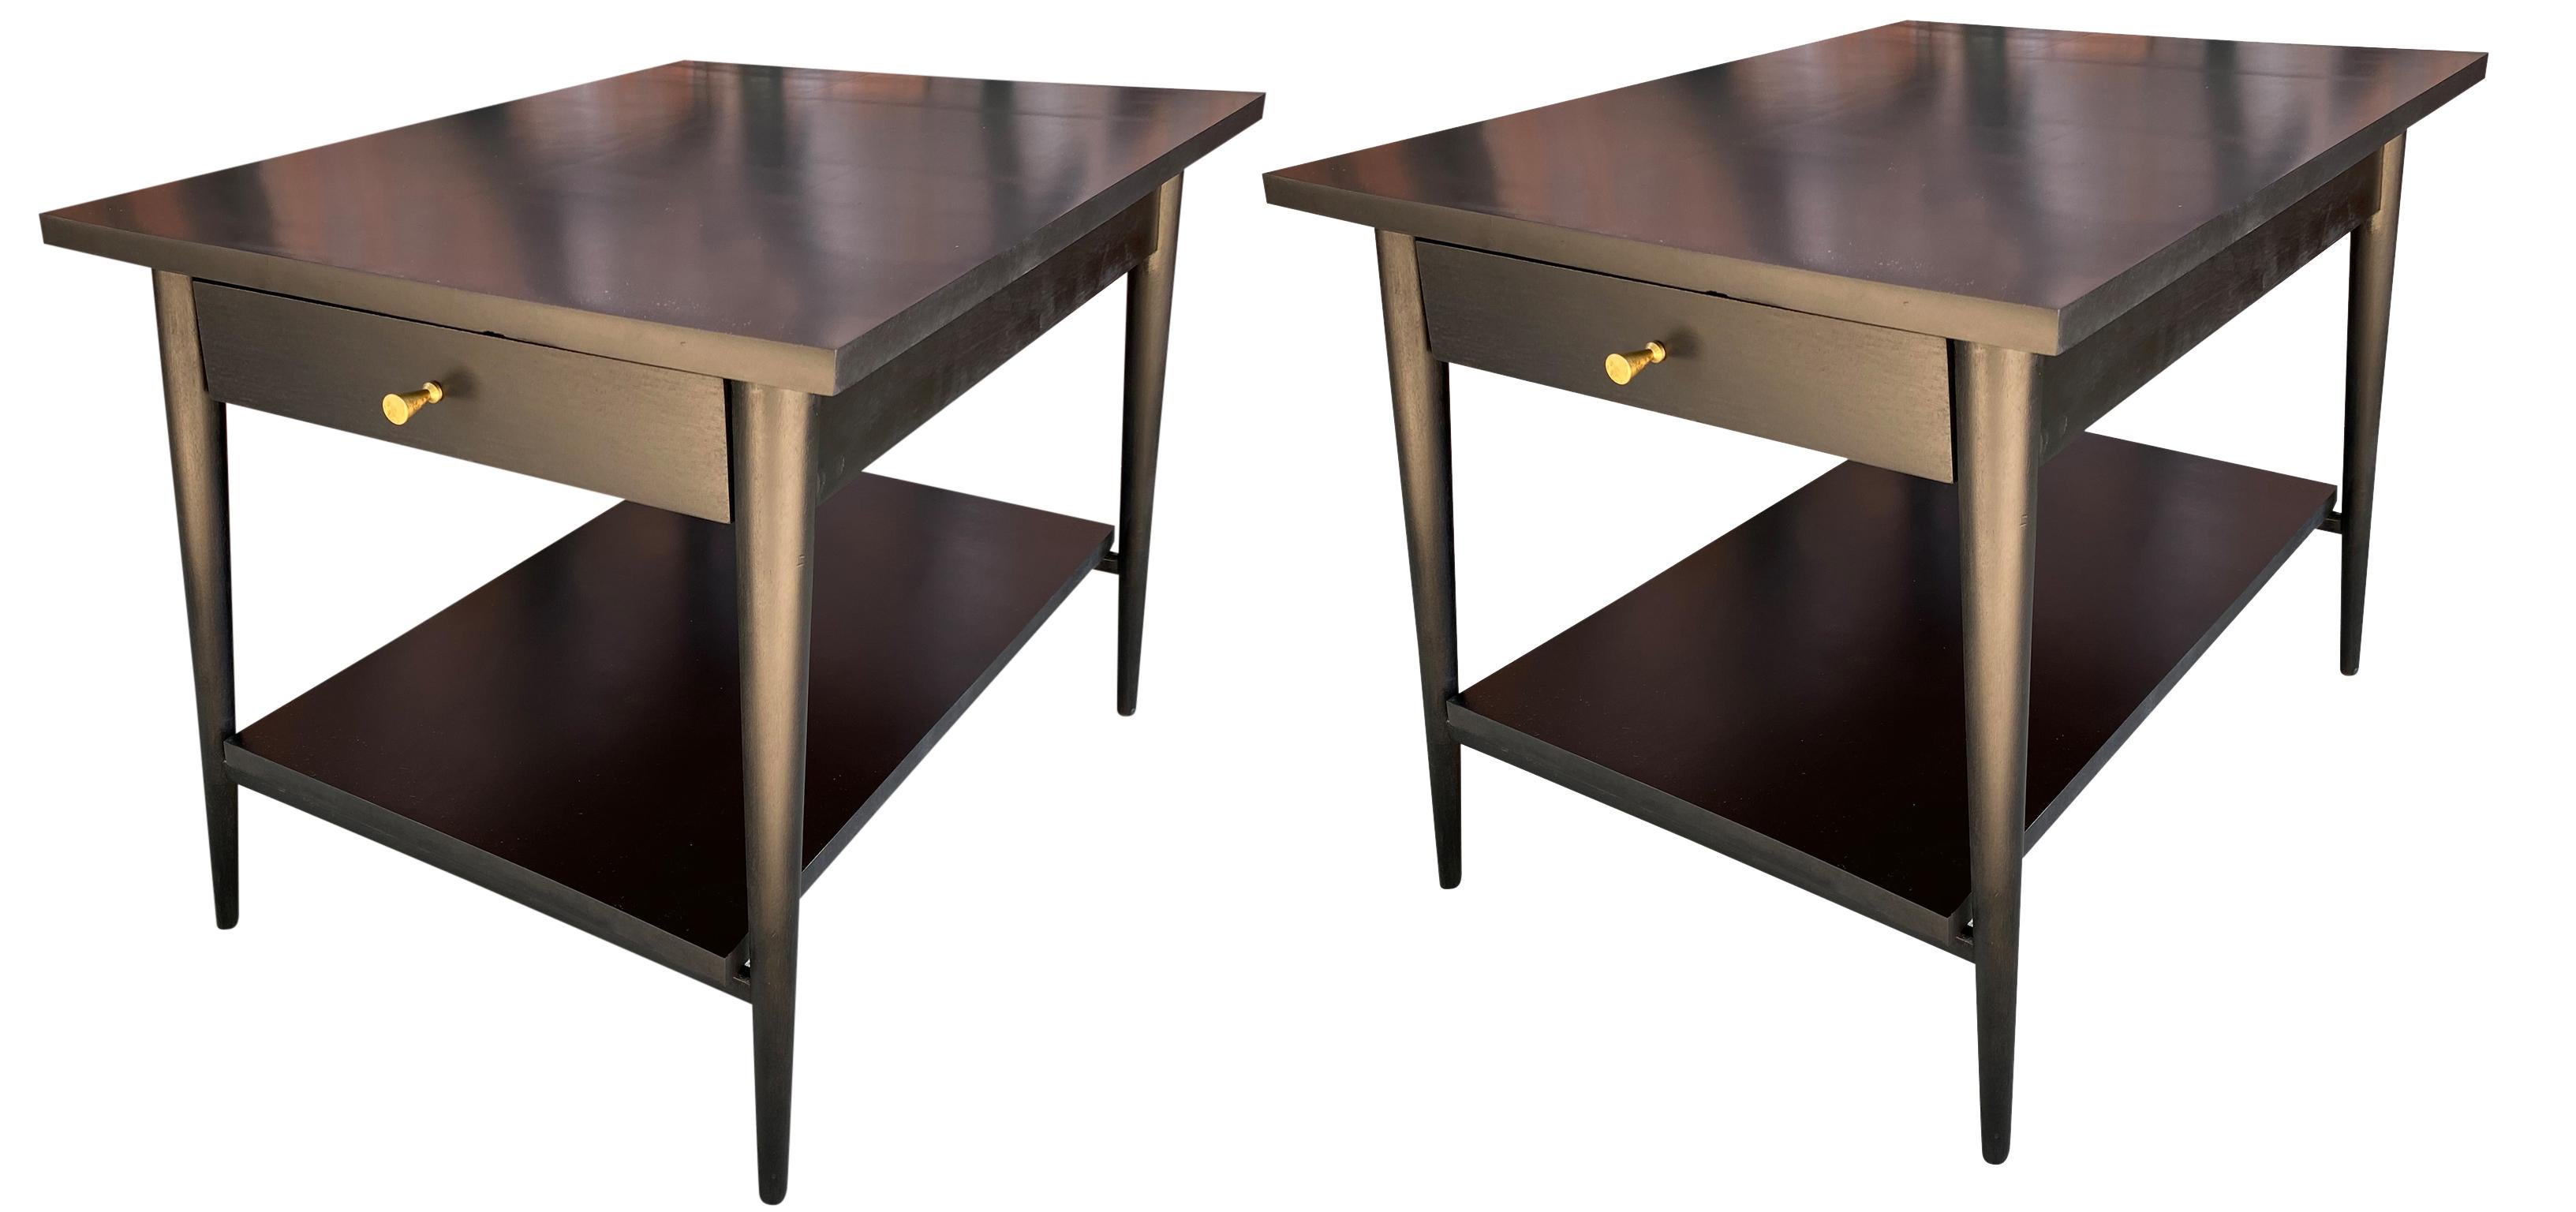 Mid-Century Modern Midcentury Paul McCobb #1587 Nightstands Black Lacquer Brass Knobs End Tables For Sale